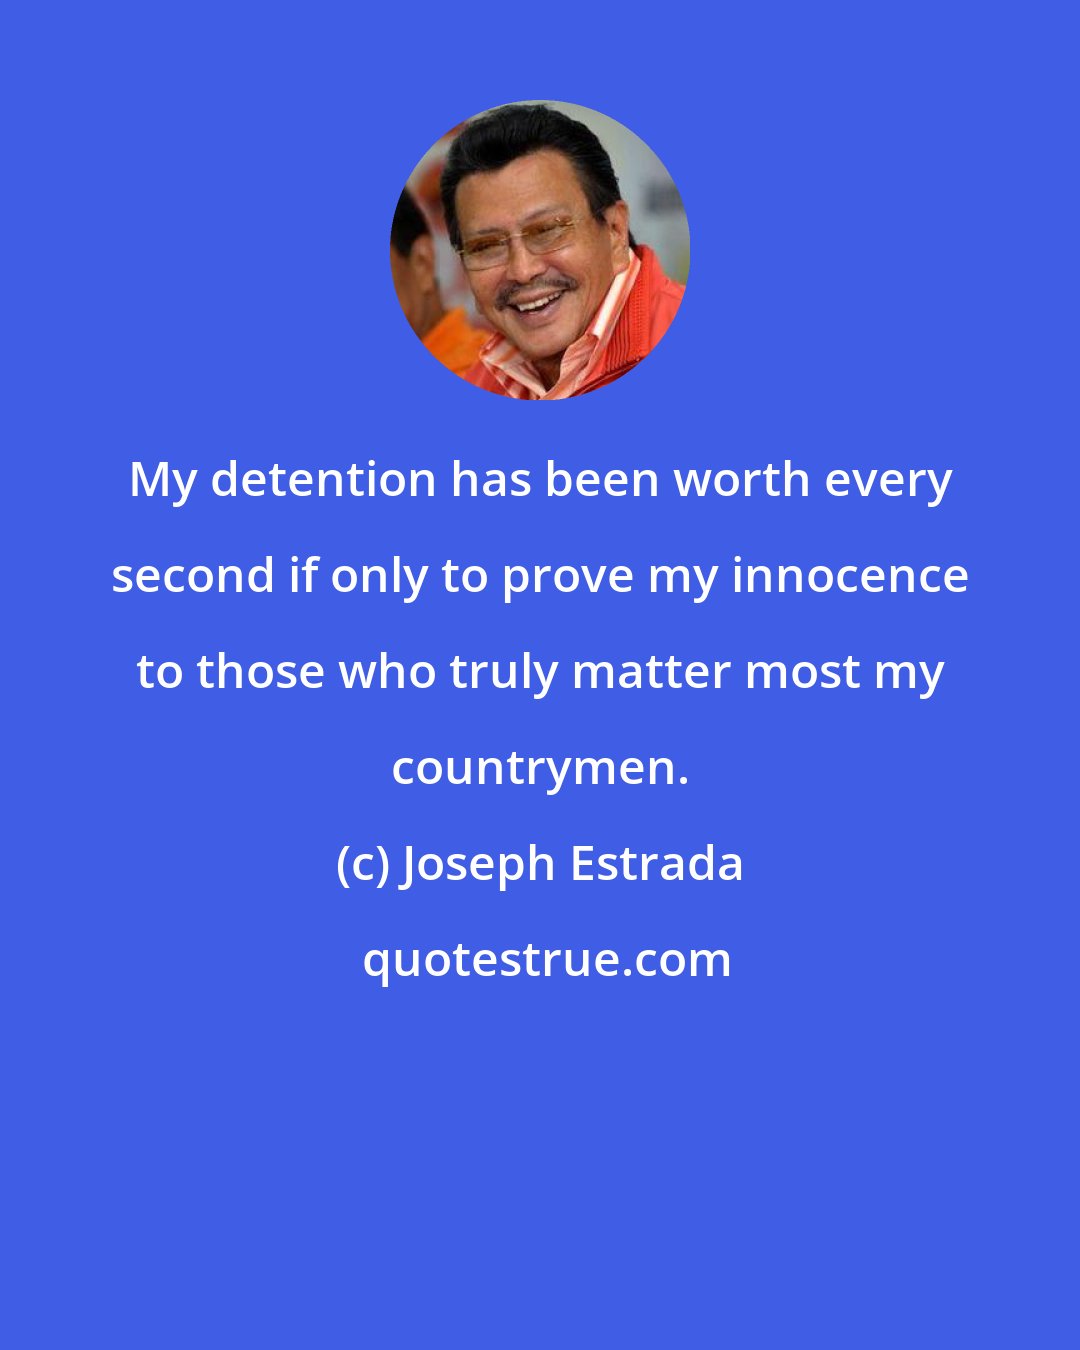 Joseph Estrada: My detention has been worth every second if only to prove my innocence to those who truly matter most my countrymen.